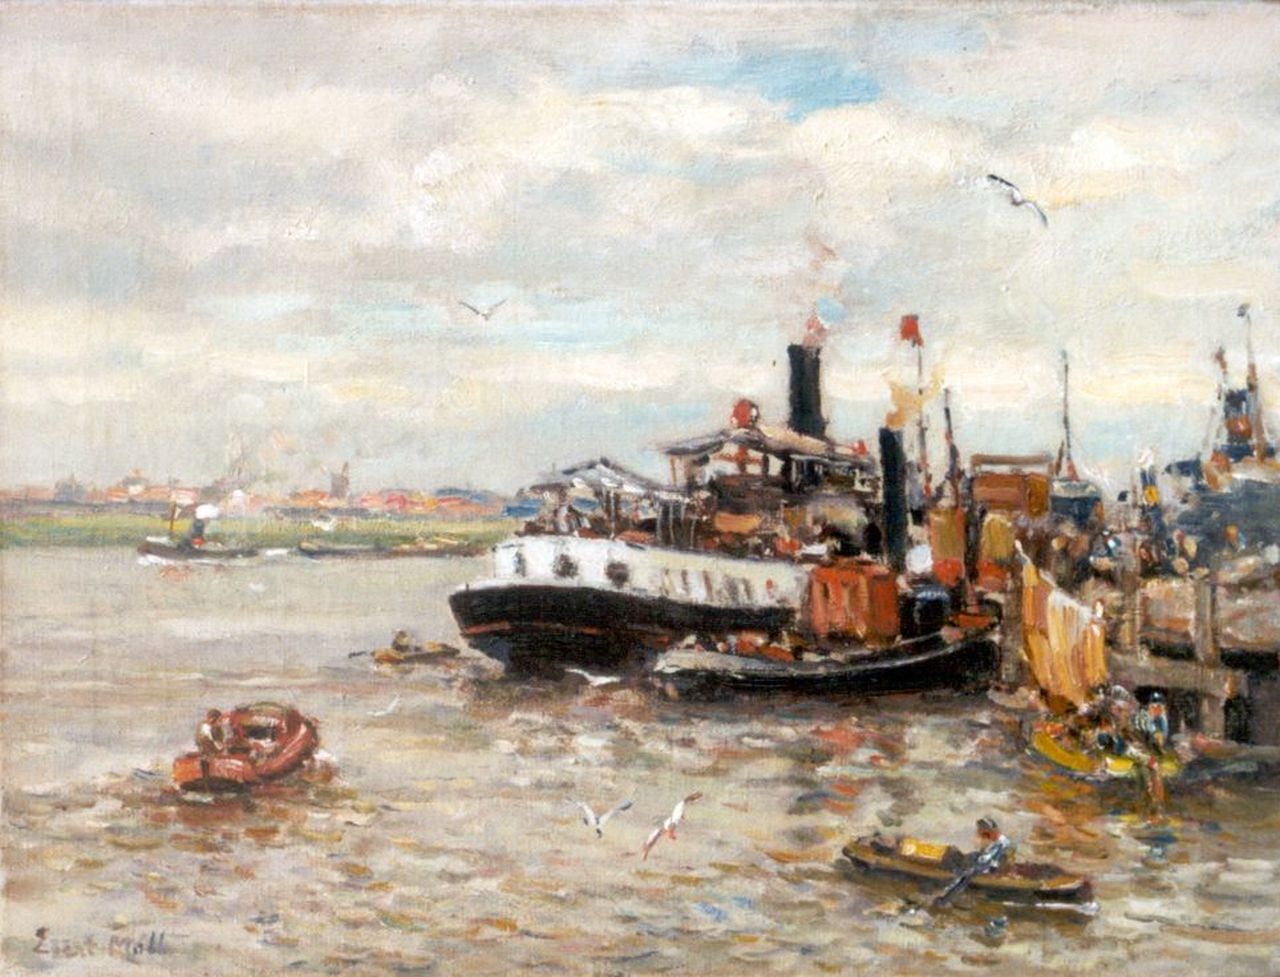 Moll E.  | Evert Moll, Passenger's service and towboats at a pier, oil on canvas 30.5 x 40.5 cm, signed l.l.